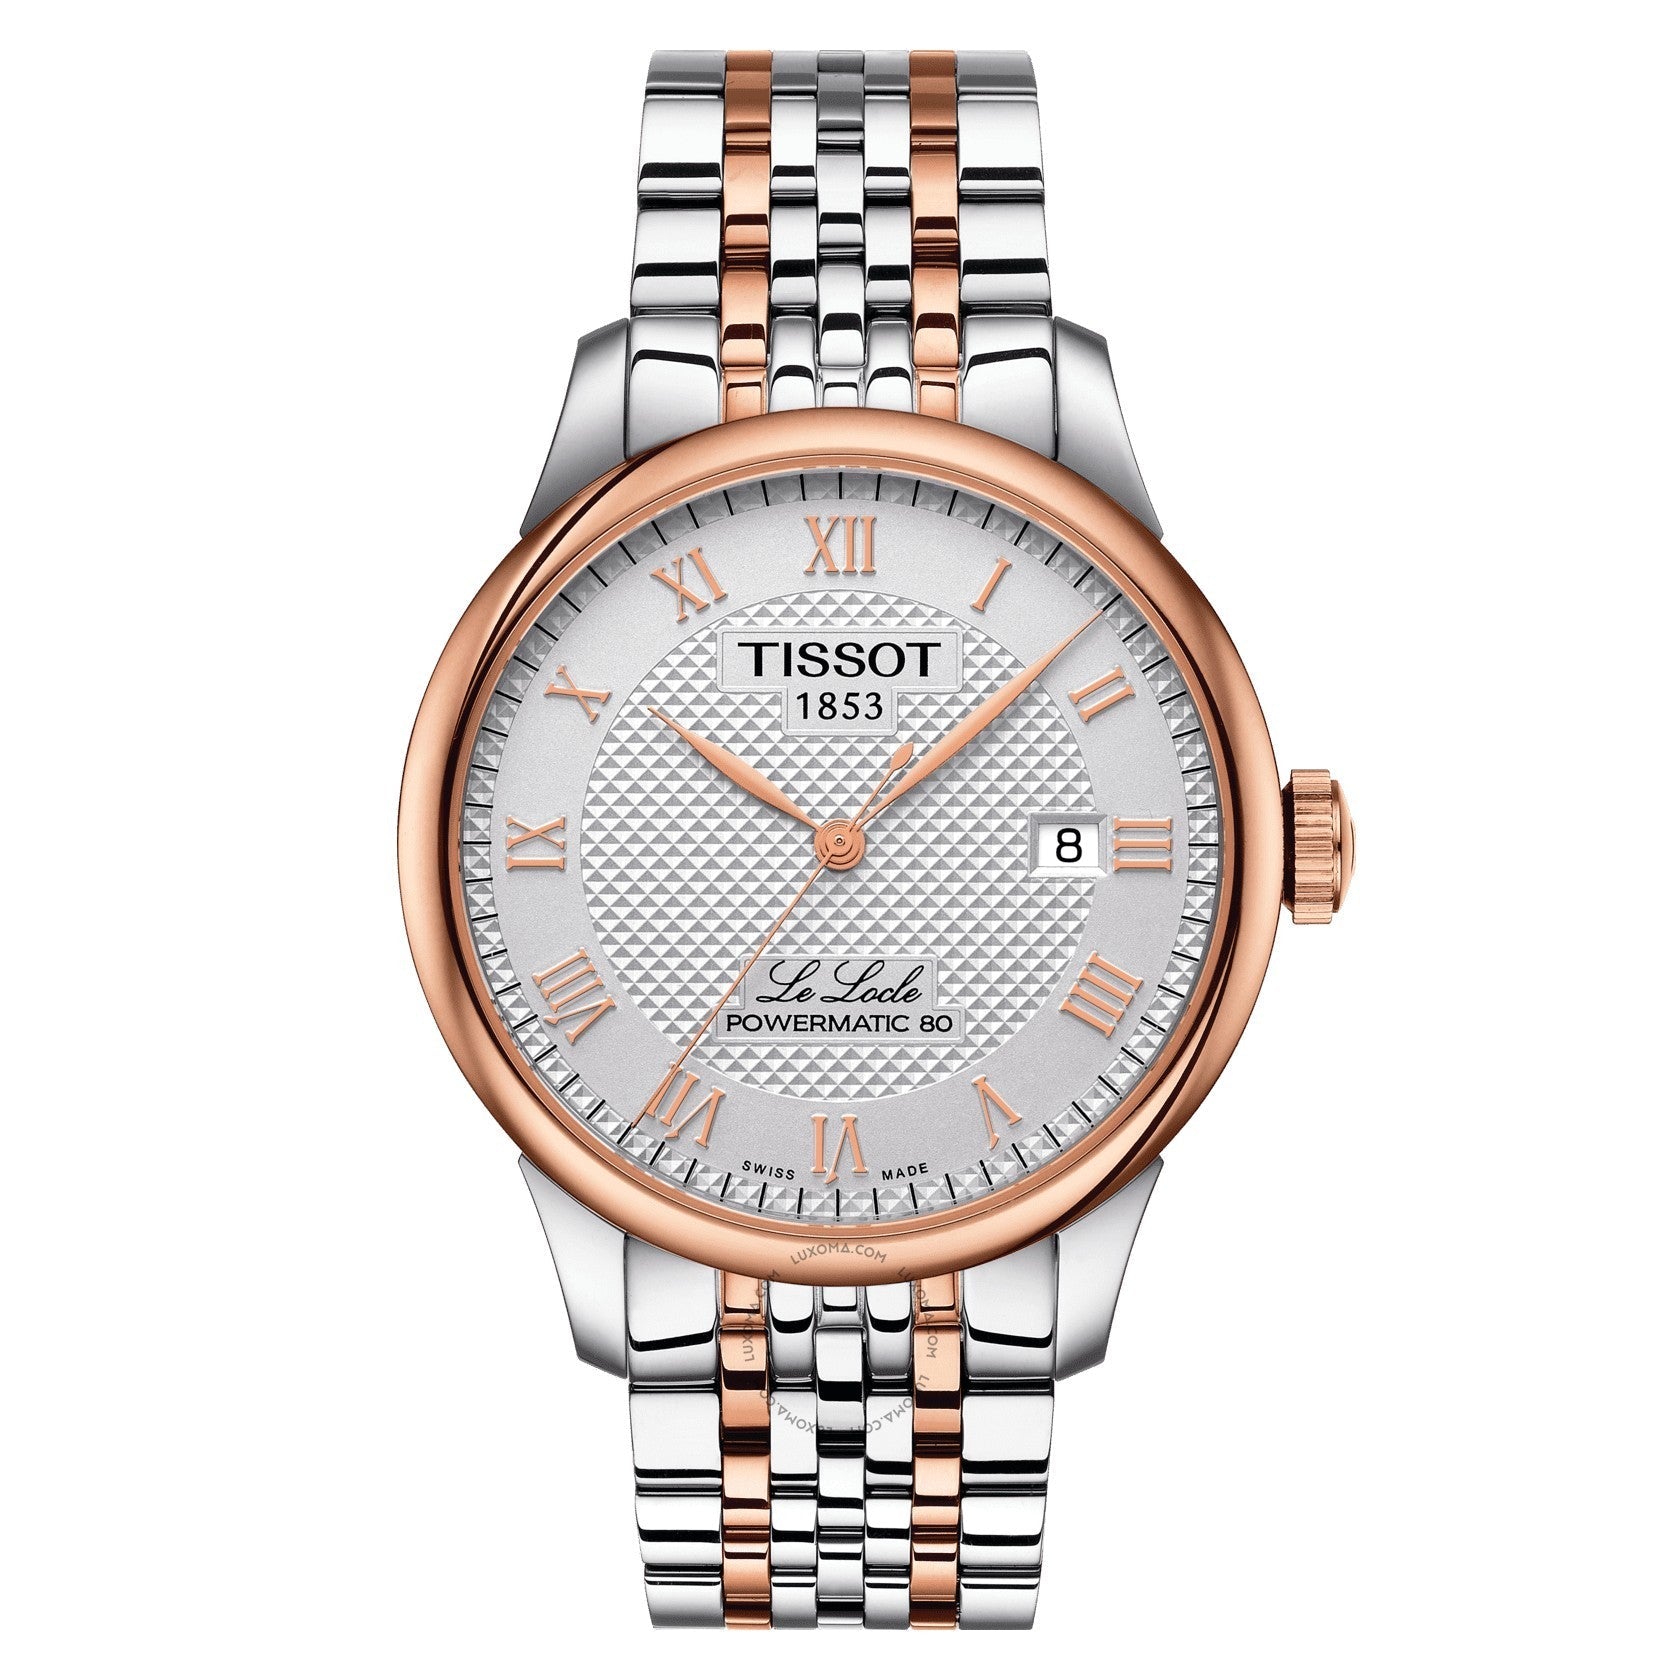 Tissot T-Classic Automatic Silver Dial Men's Watch T006.407.22.033.00